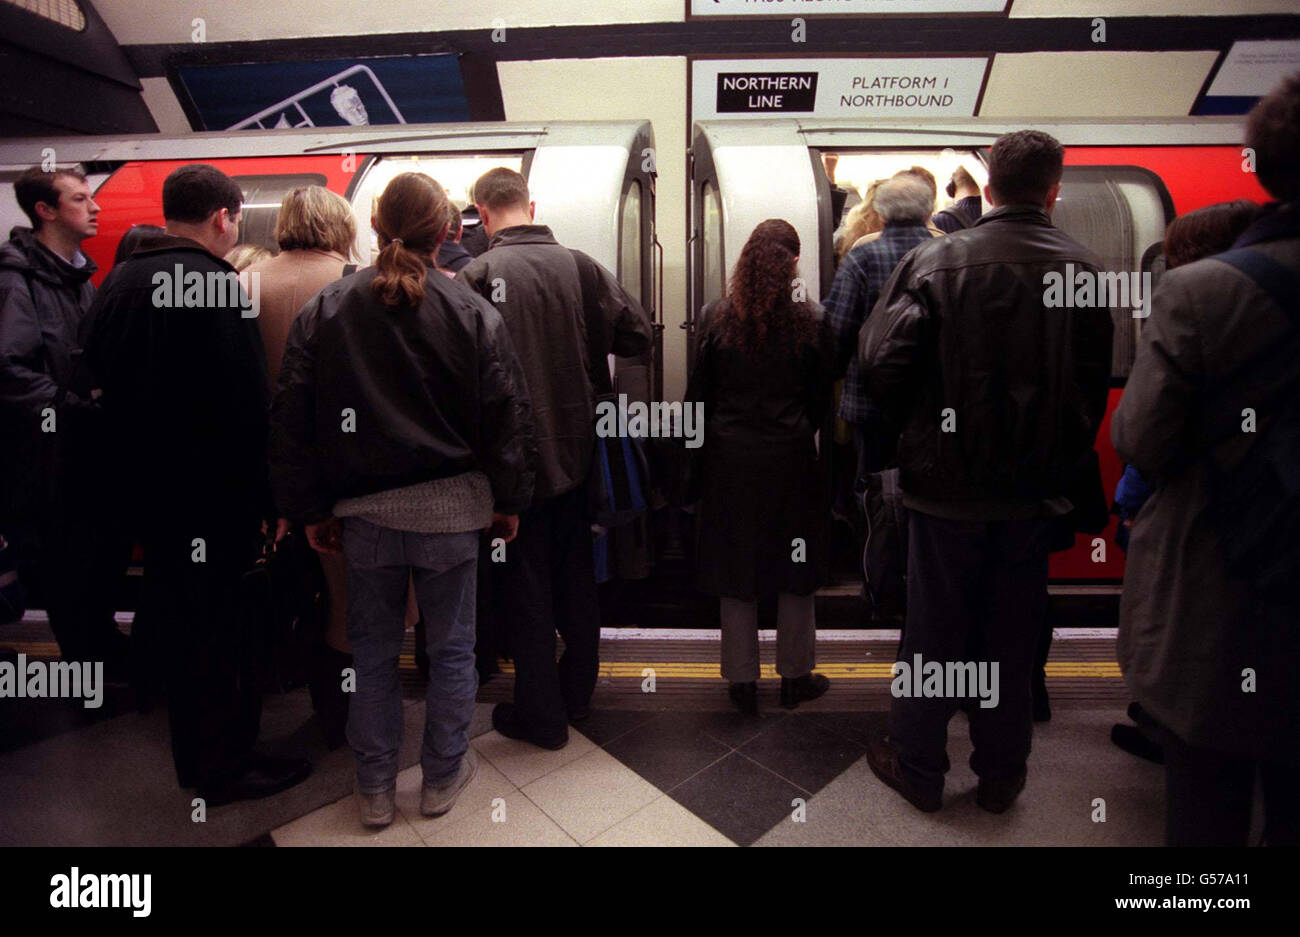 Passengers waiting to board a London underground train. 20/12/00: Underground has become a premier film location, providing backdrops for many leading releases, a new report showed. More than 200 requests to shoot scenes in Tube stations have been received. * this year alone. Film-makers have gone underground to record scenes for a number of top films including Superman IV, Mission Impossible, Sliding Doors, The End of The Affair and this summer's blockbuster, Billy Elliot. Some of the longer scenes have had to be filmed at night or in stations which are closed at weekends to avoid disruption Stock Photo